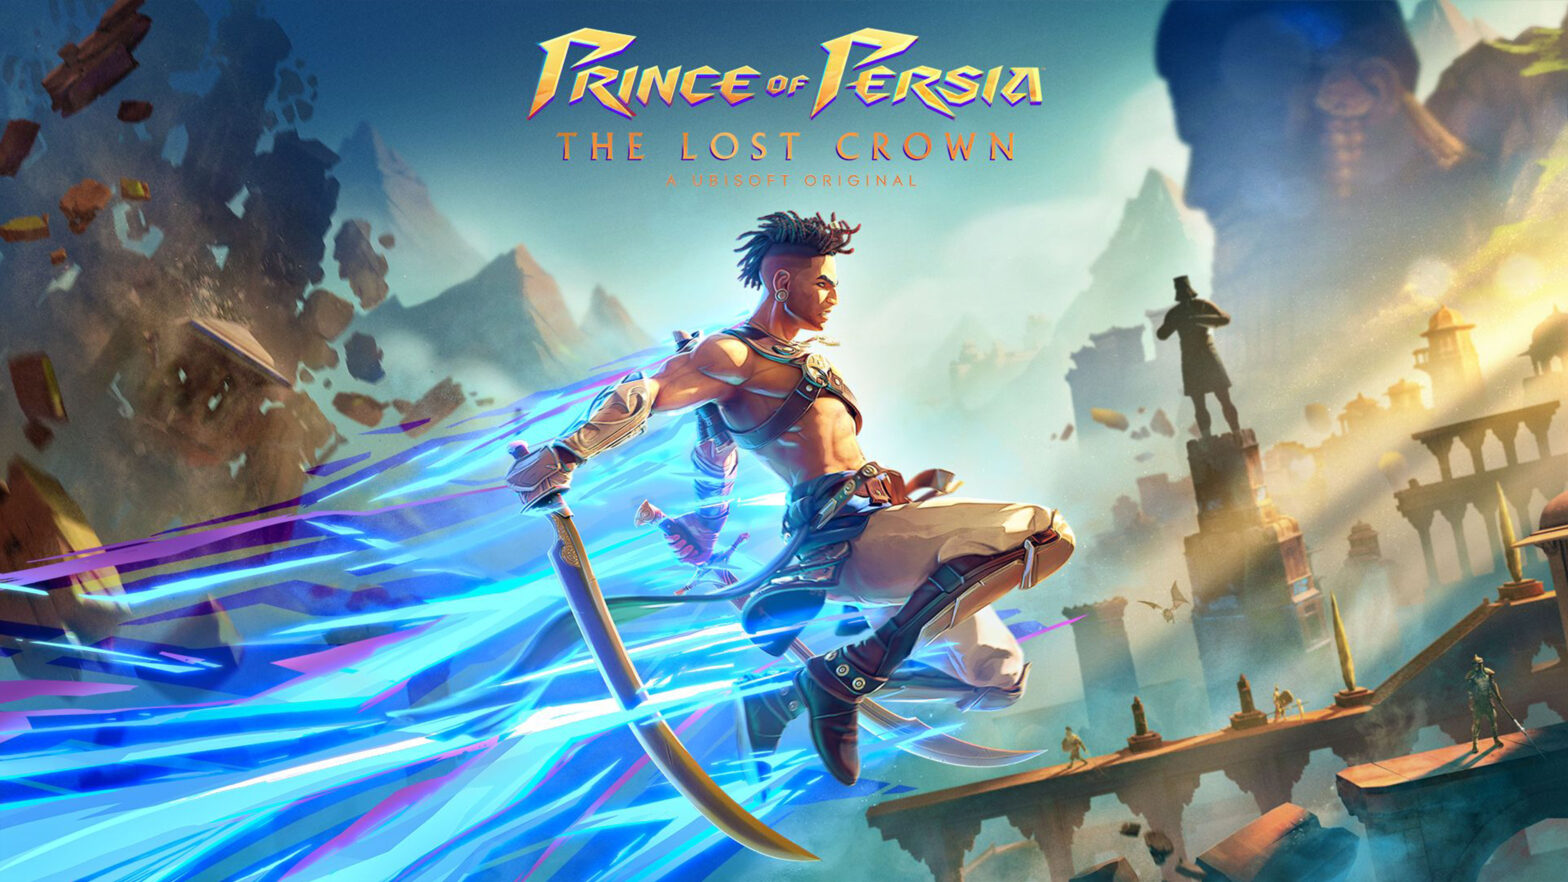 Prince of Persia: The Lost Crown - Main Art